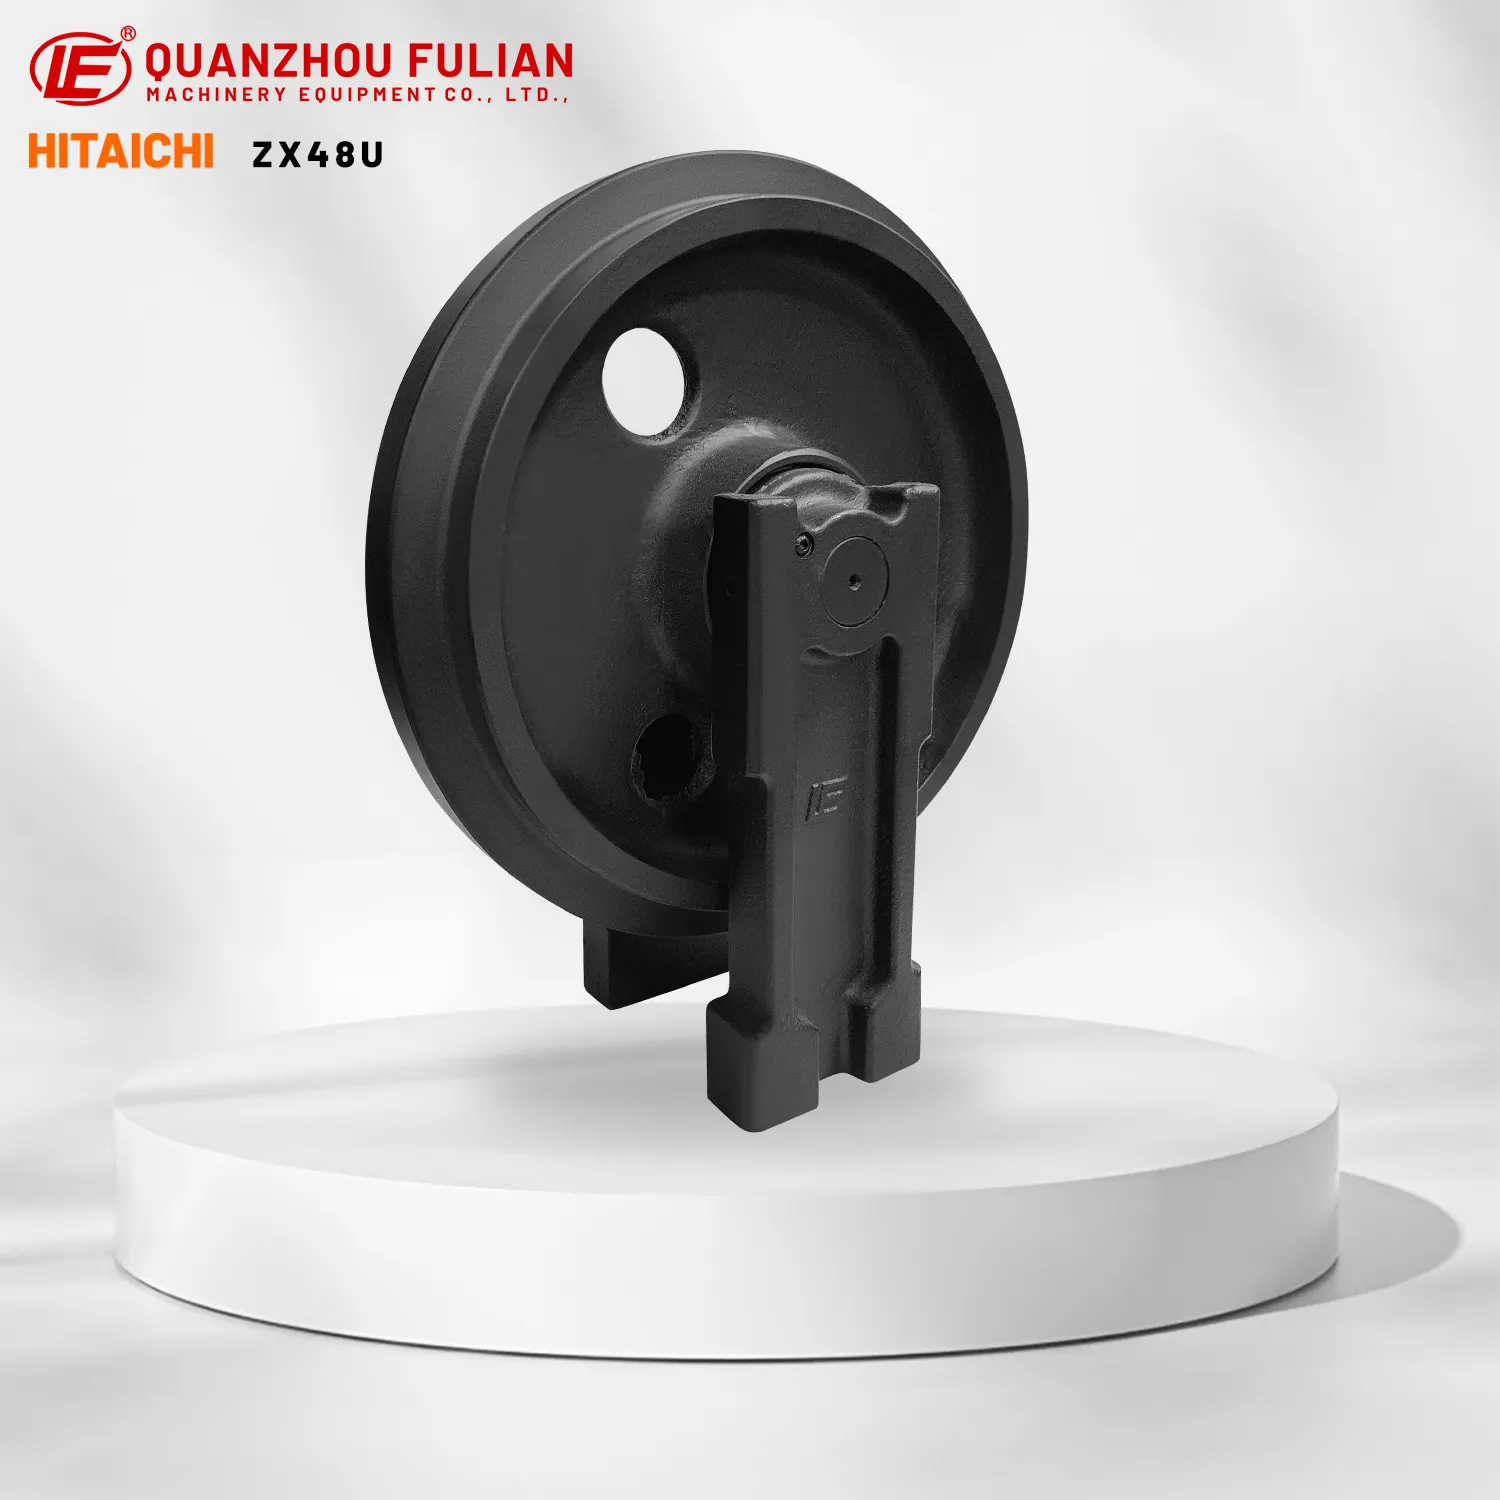 High Quality Construction Machinery Undercarriage Parts ZX48U Idler Wheel For Hitachi Track Idler